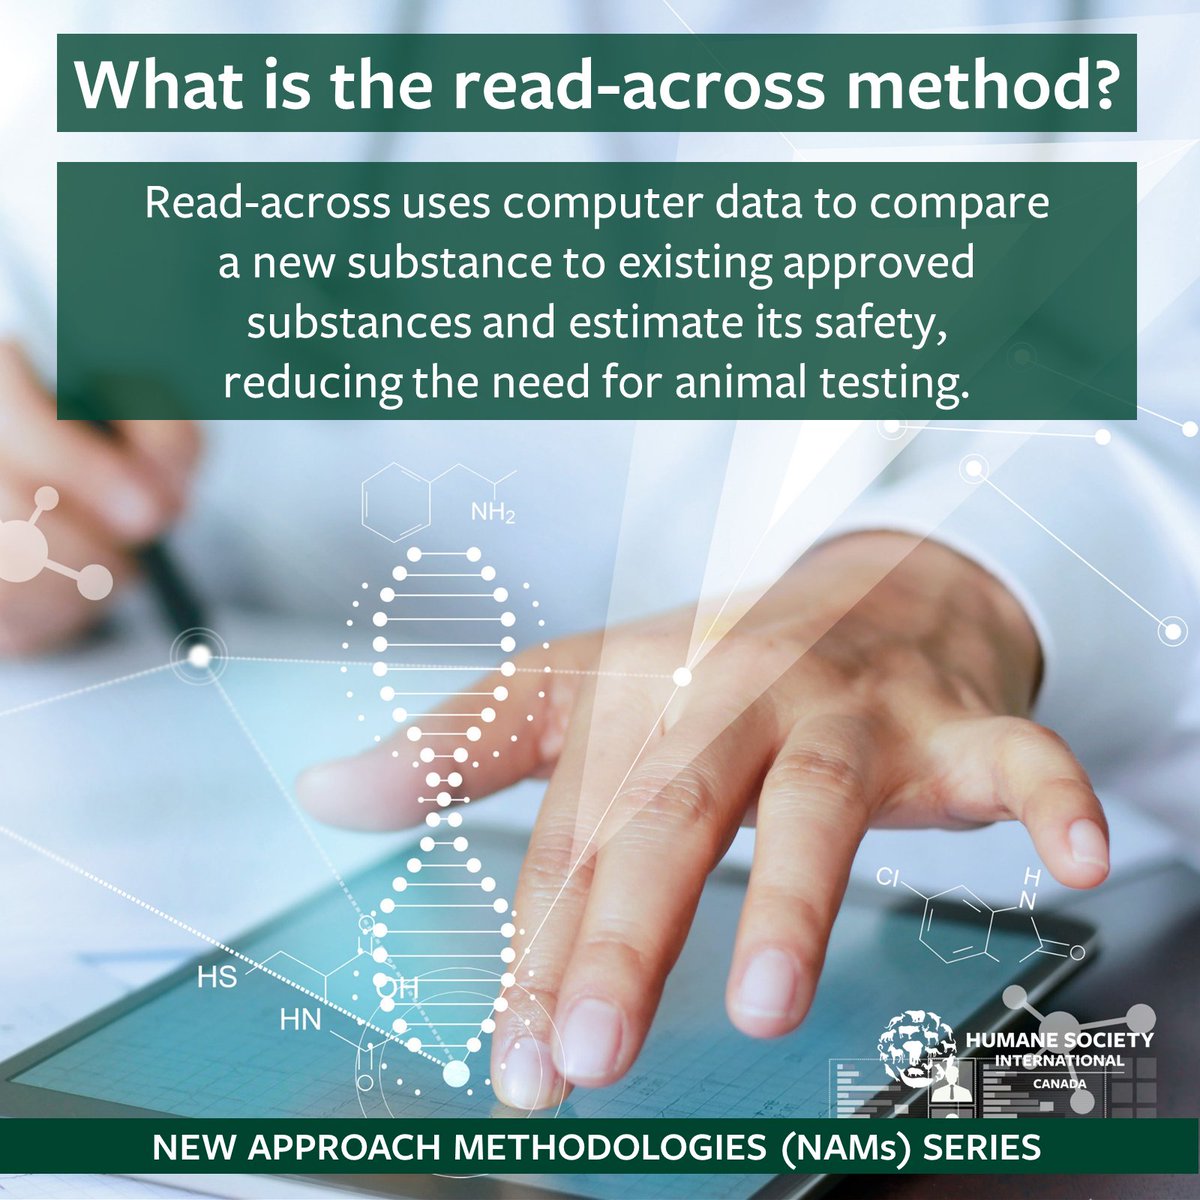 As part of our #NAMSeries, today we look at the non-animal method, 'read-across', which predicts a new substance's #safety by comparing it to similar substances. It often uses #computermodels to find like-substances and existing data, helping to reduce #animaltesting. 🧬💻